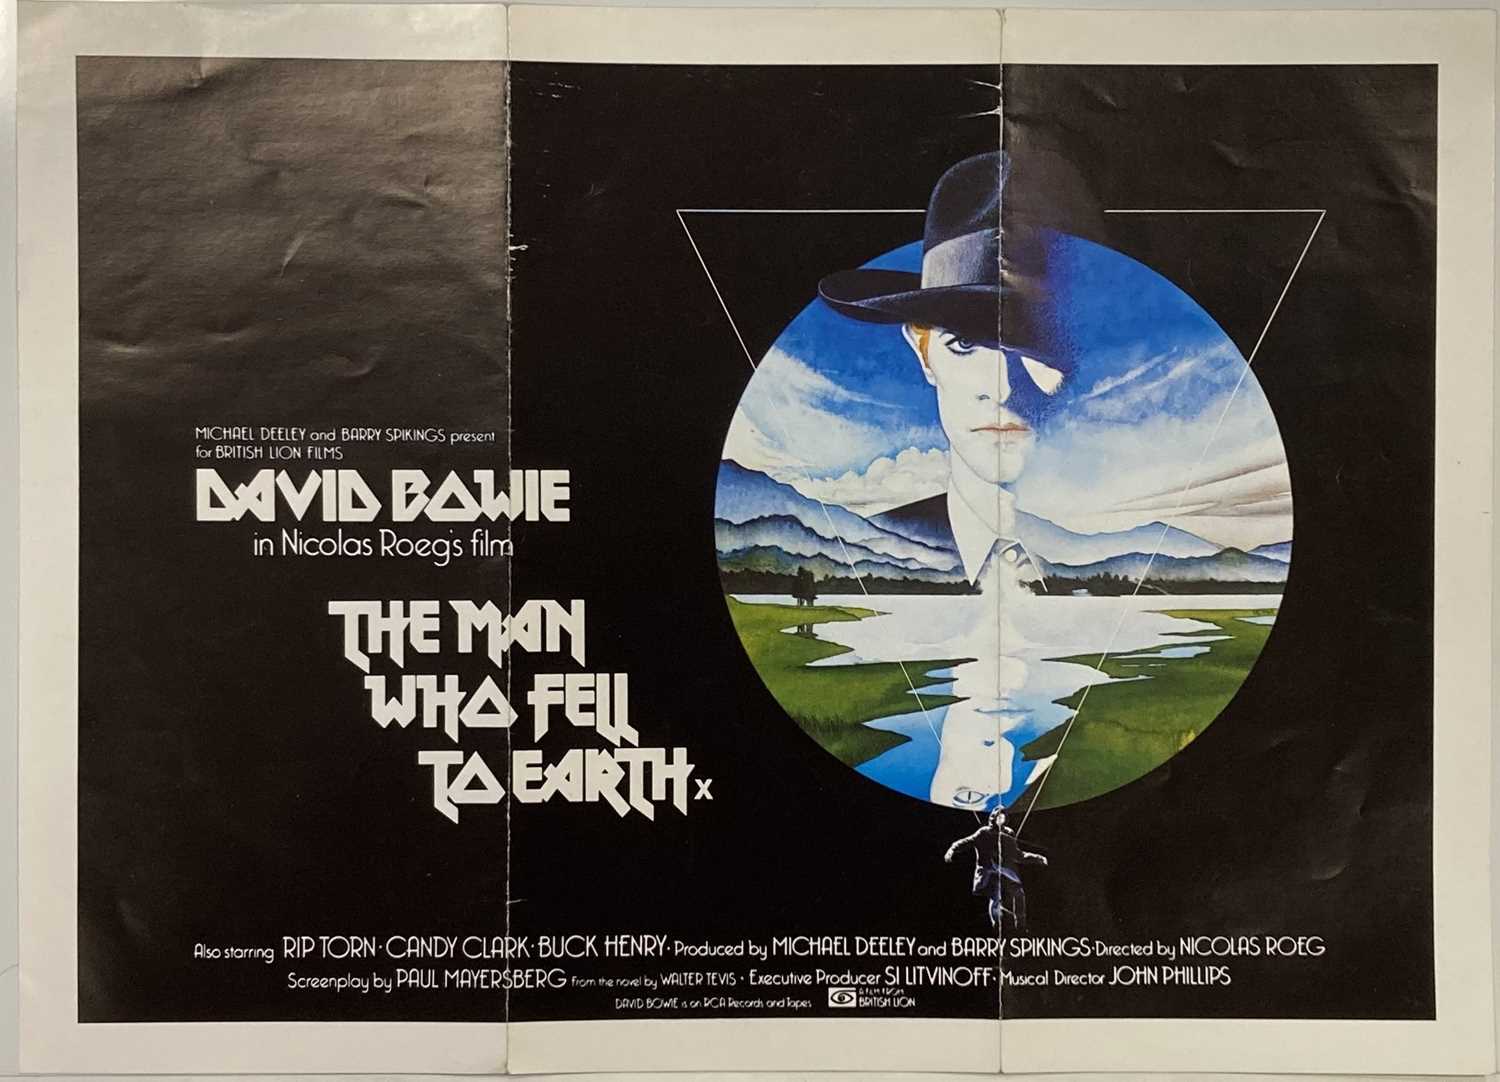 Lot 316 - DAVID BOWIE MAN WHO FELL TO EARTH PREMIERE INVITATION